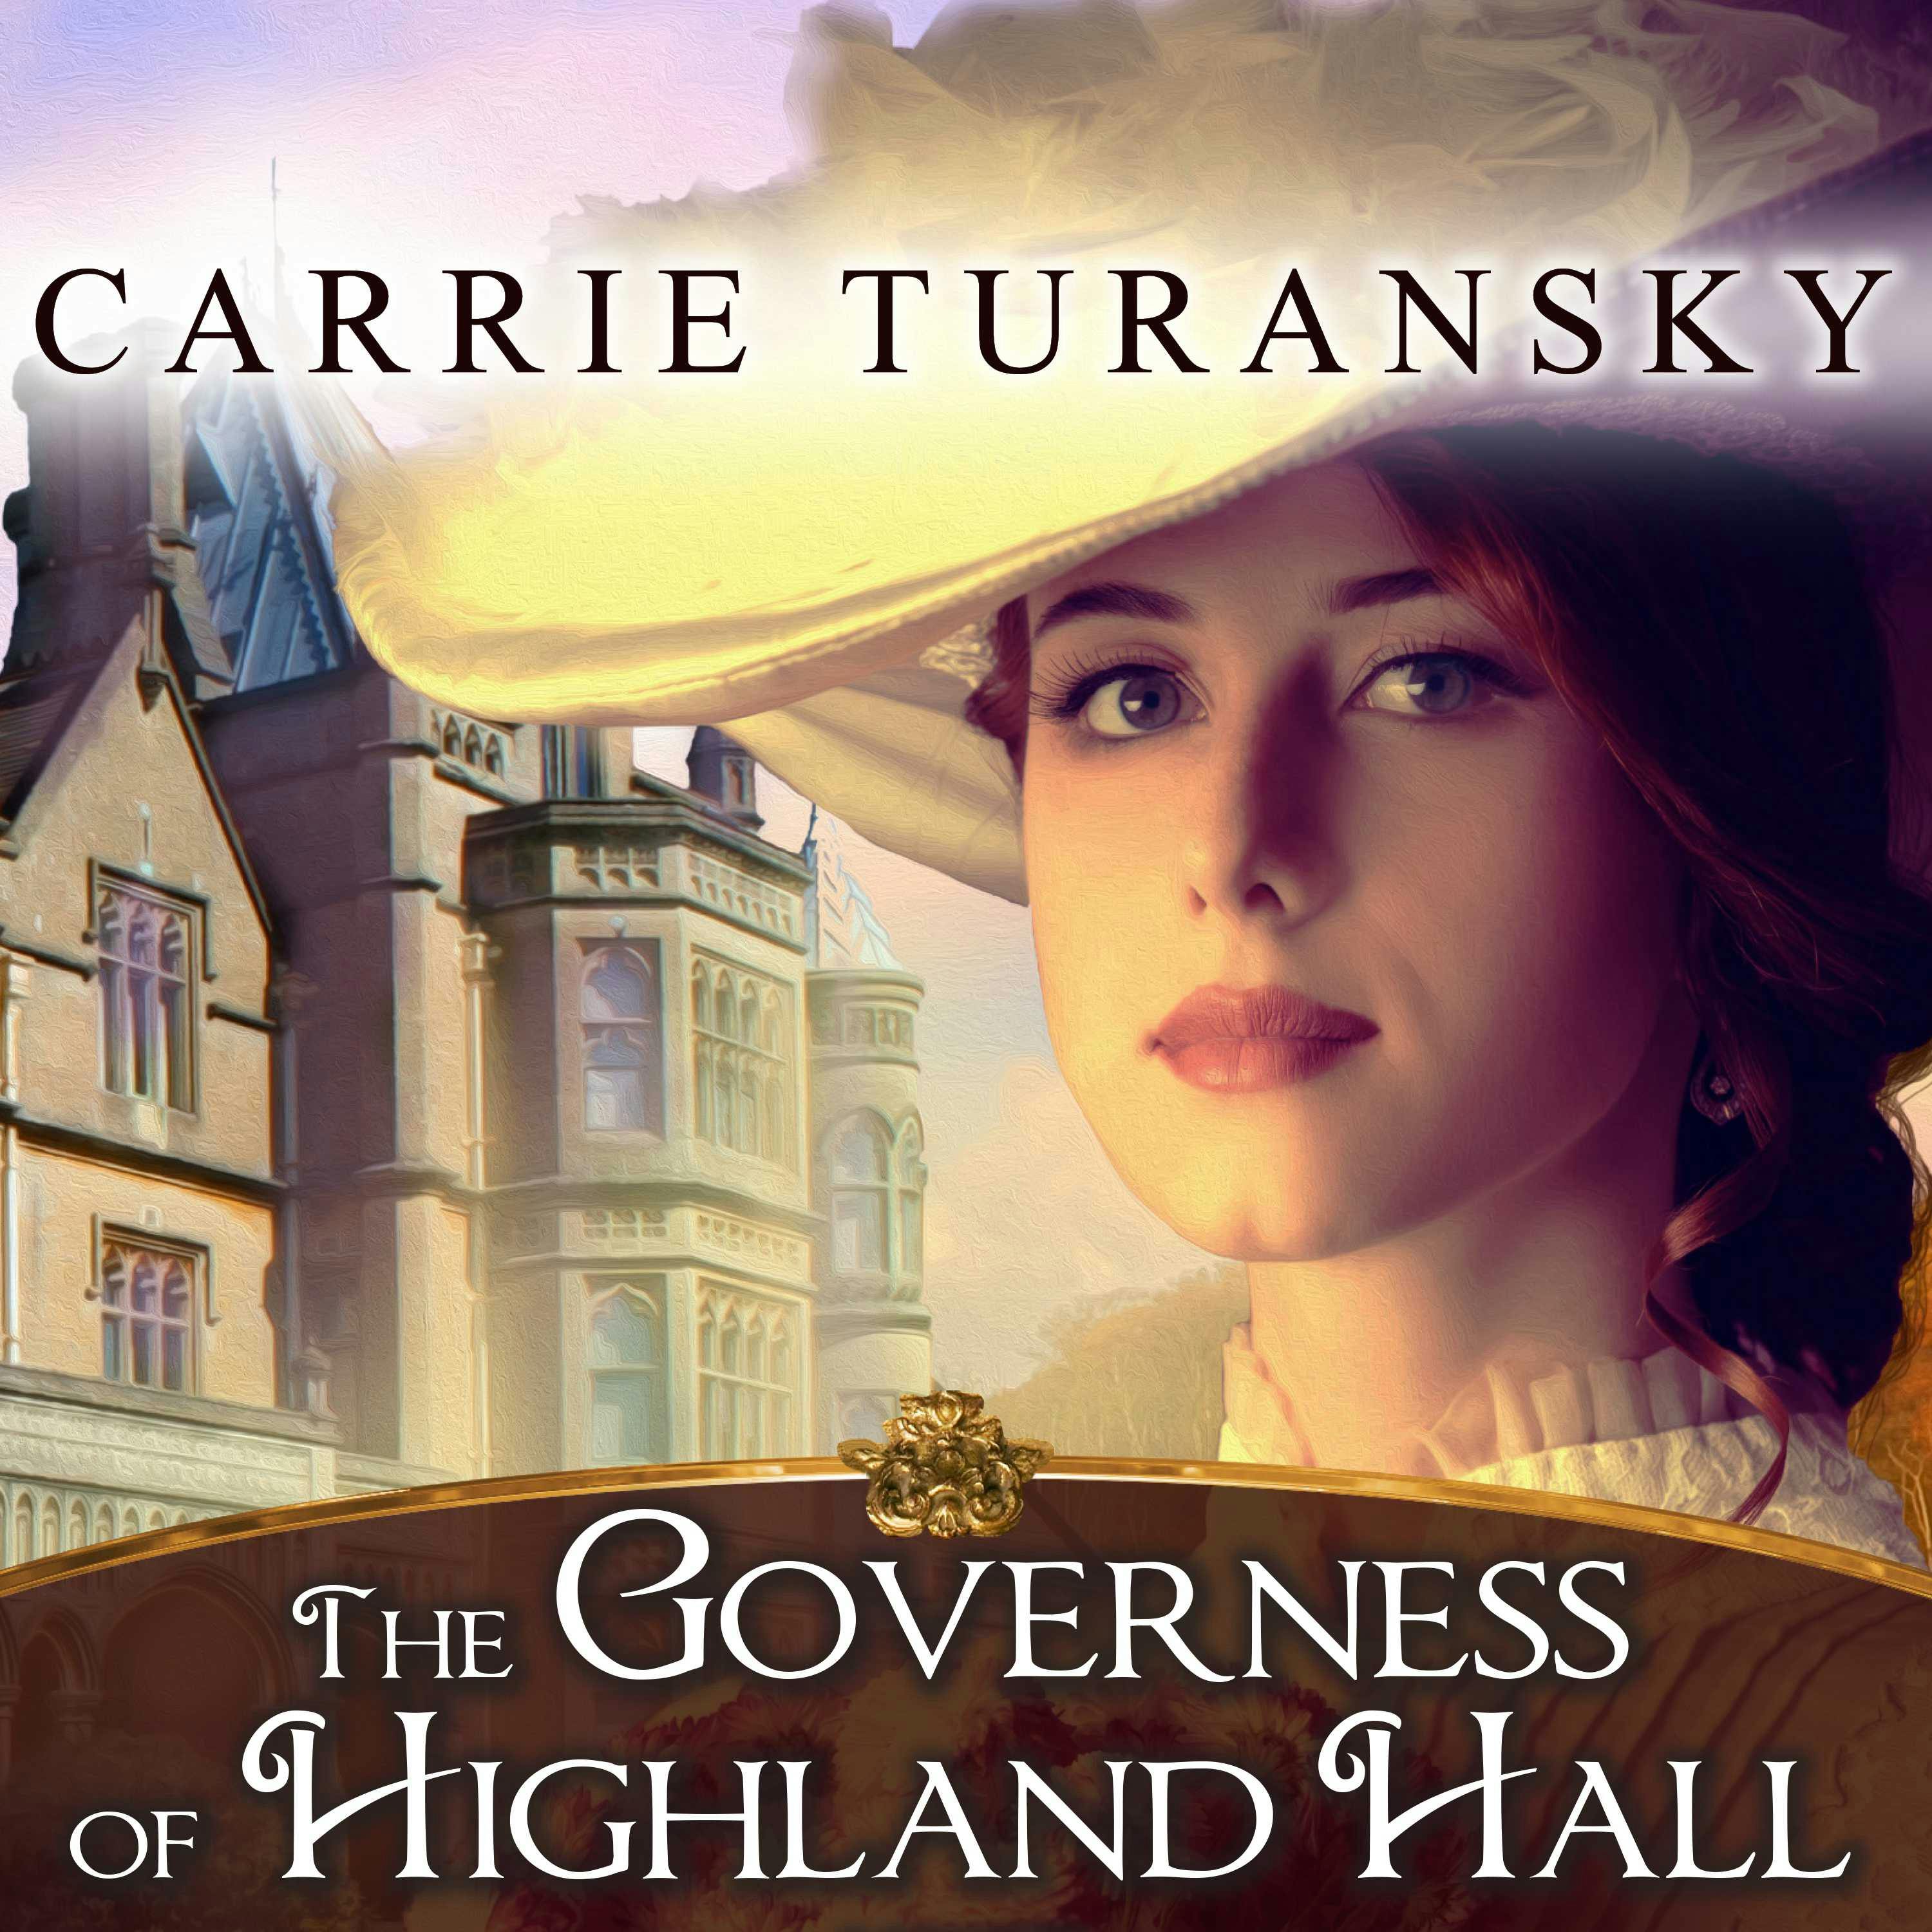 The Governess of Highland Hall - Carrie Turansky